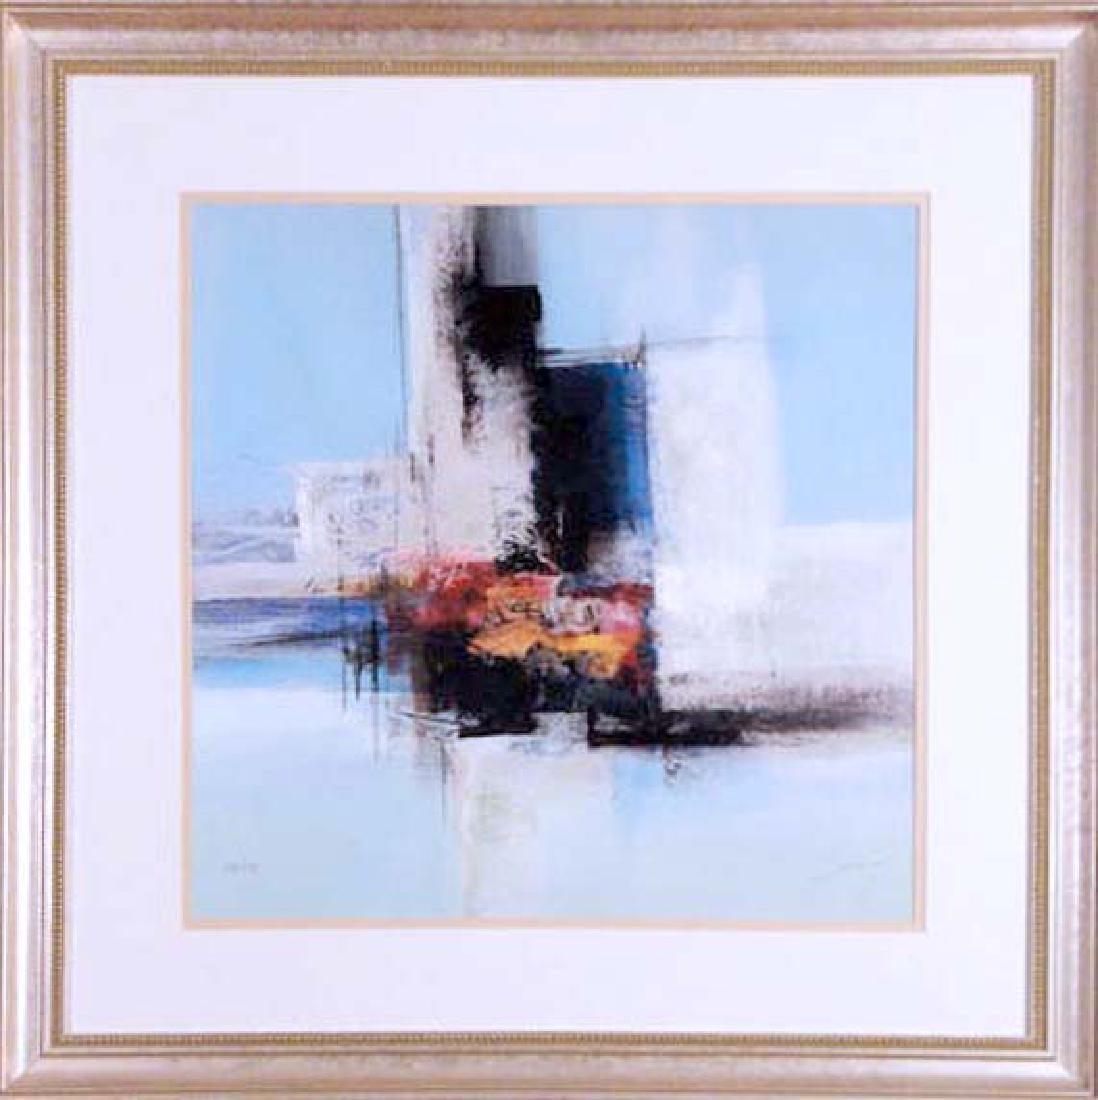 Souelt Abstract Print - "Abstract Design" Signed and Framed, Limited Edition Lithograph, 250/295